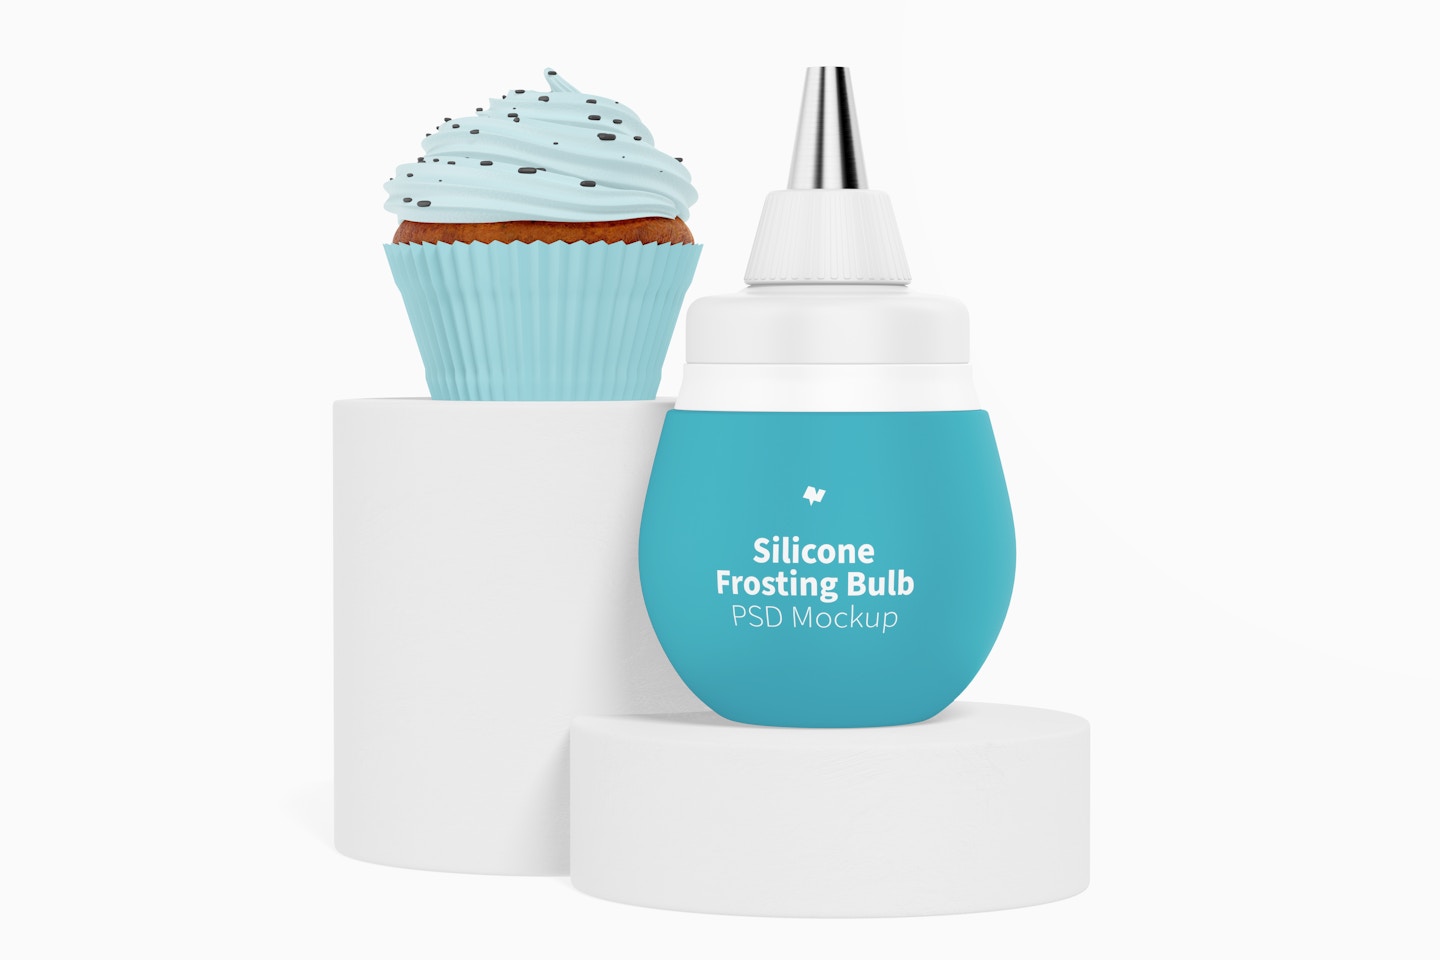 Silicone Frosting Bulb On Surface Mockup